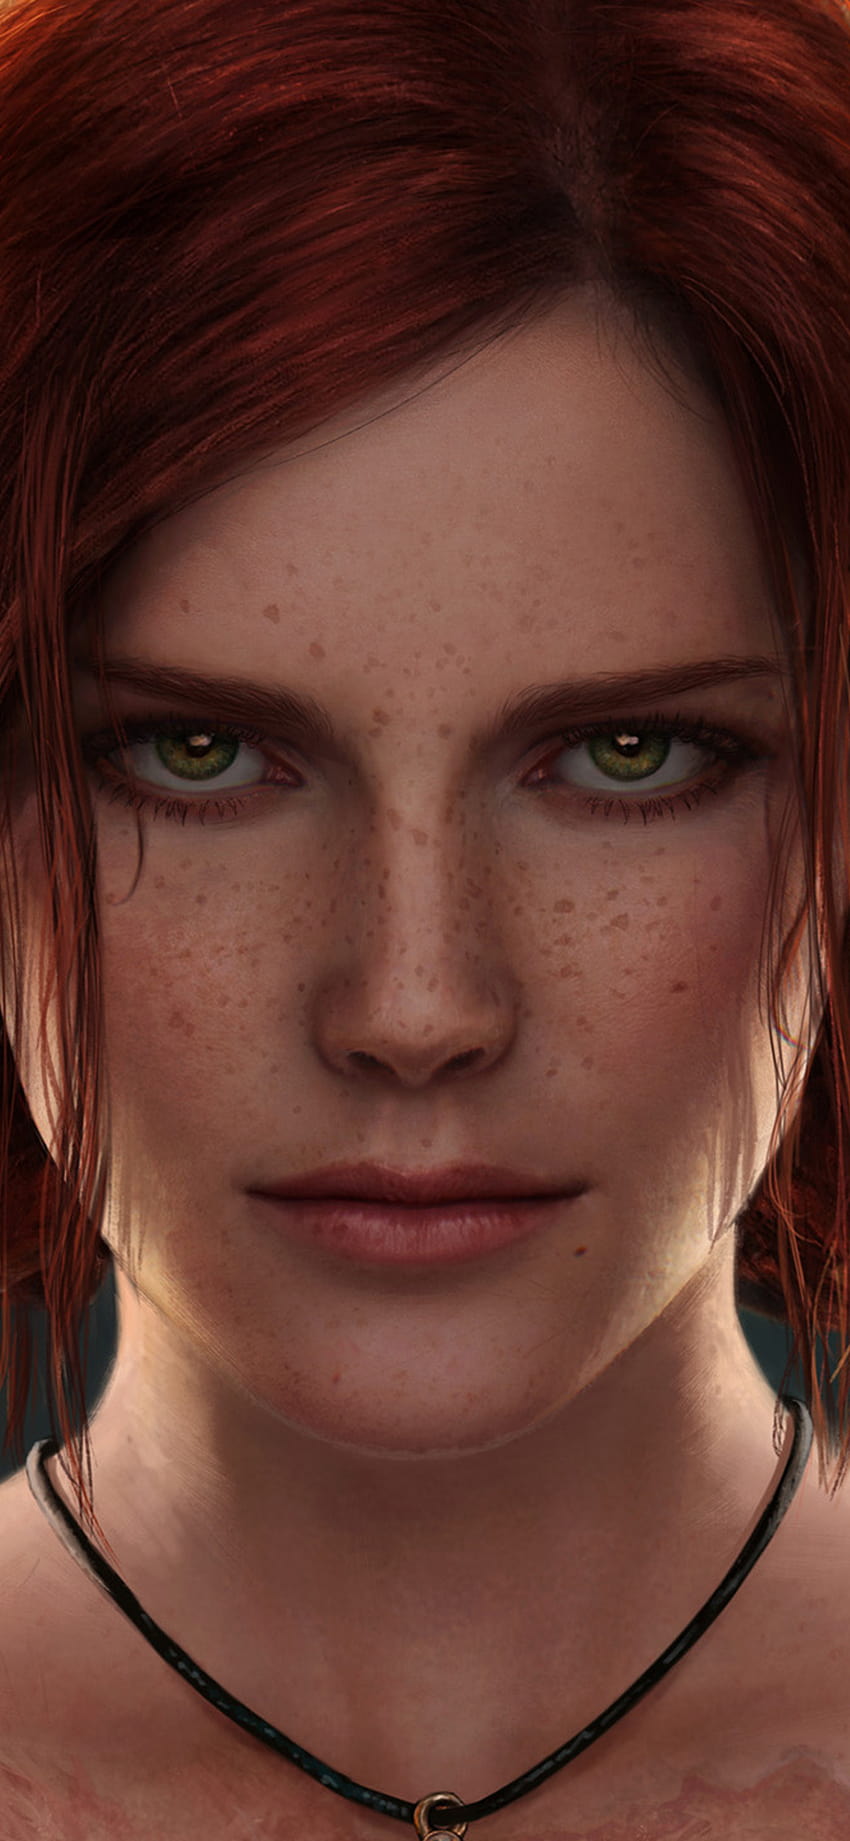 1125x2436 Triss Merigold Witcher 3 Iphone XS,Iphone 10,Iphone X, Latar belakang, dan, triss merigold iphone wallpaper ponsel HD